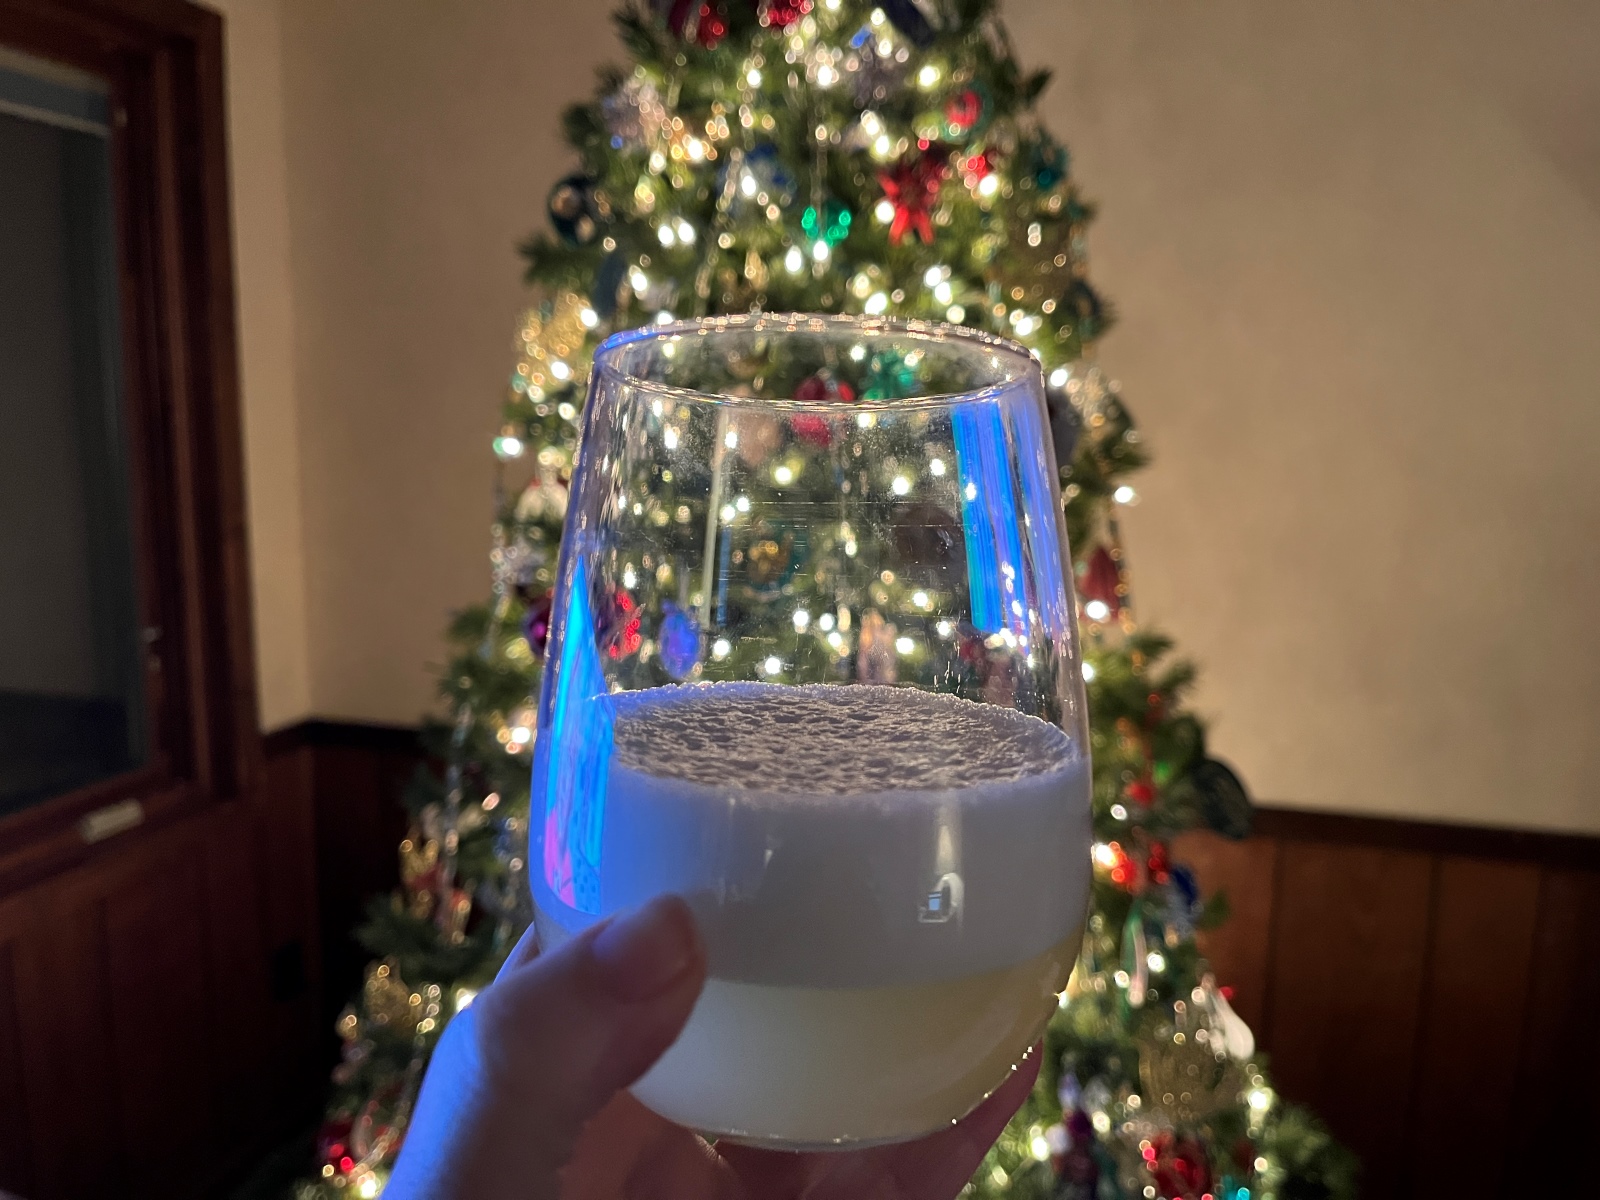 A hand holds a cocktail glass containing a Pisco sour in front of a Christmas tree